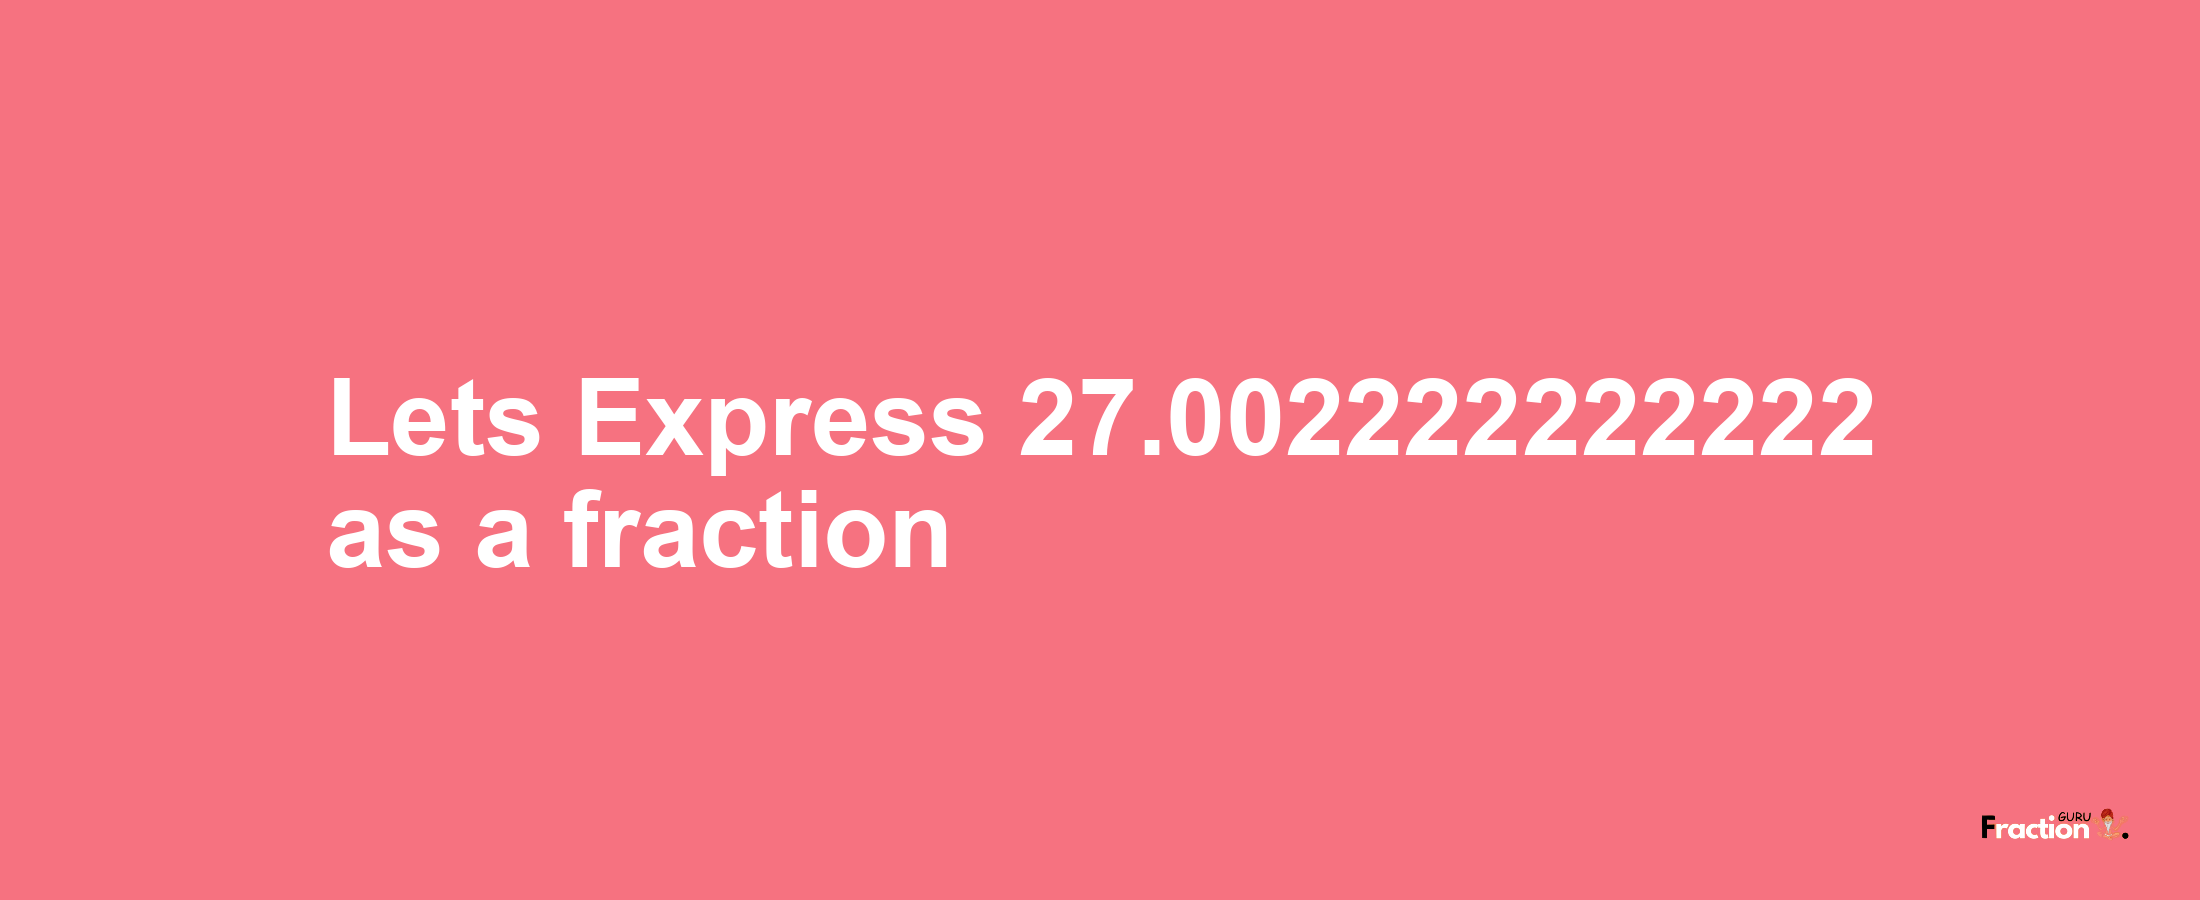 Lets Express 27.002222222222 as afraction